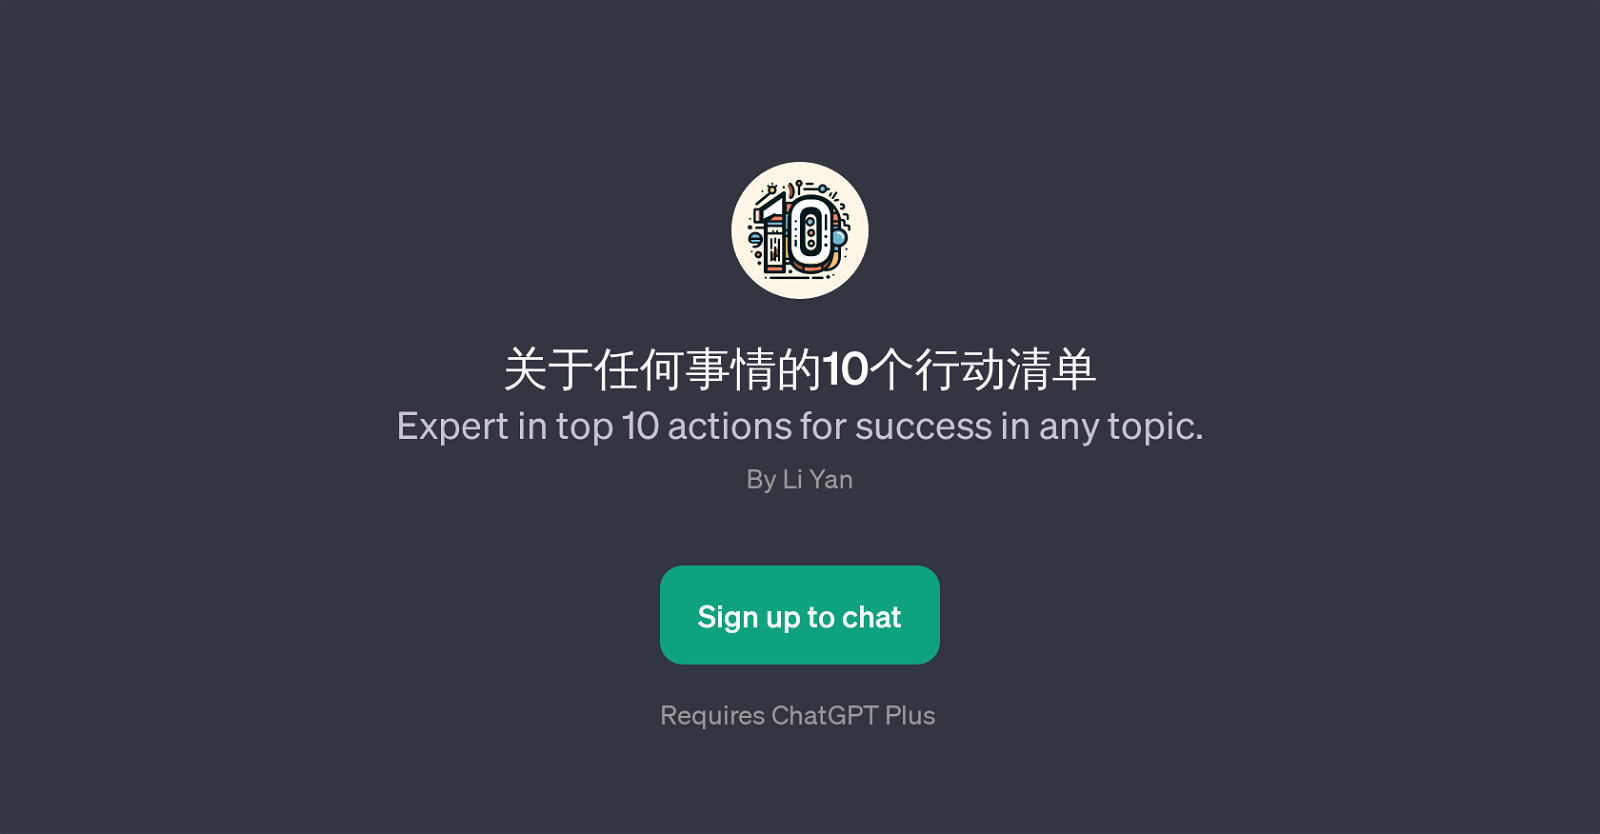 Expert in top 10 actions for success in any topic website